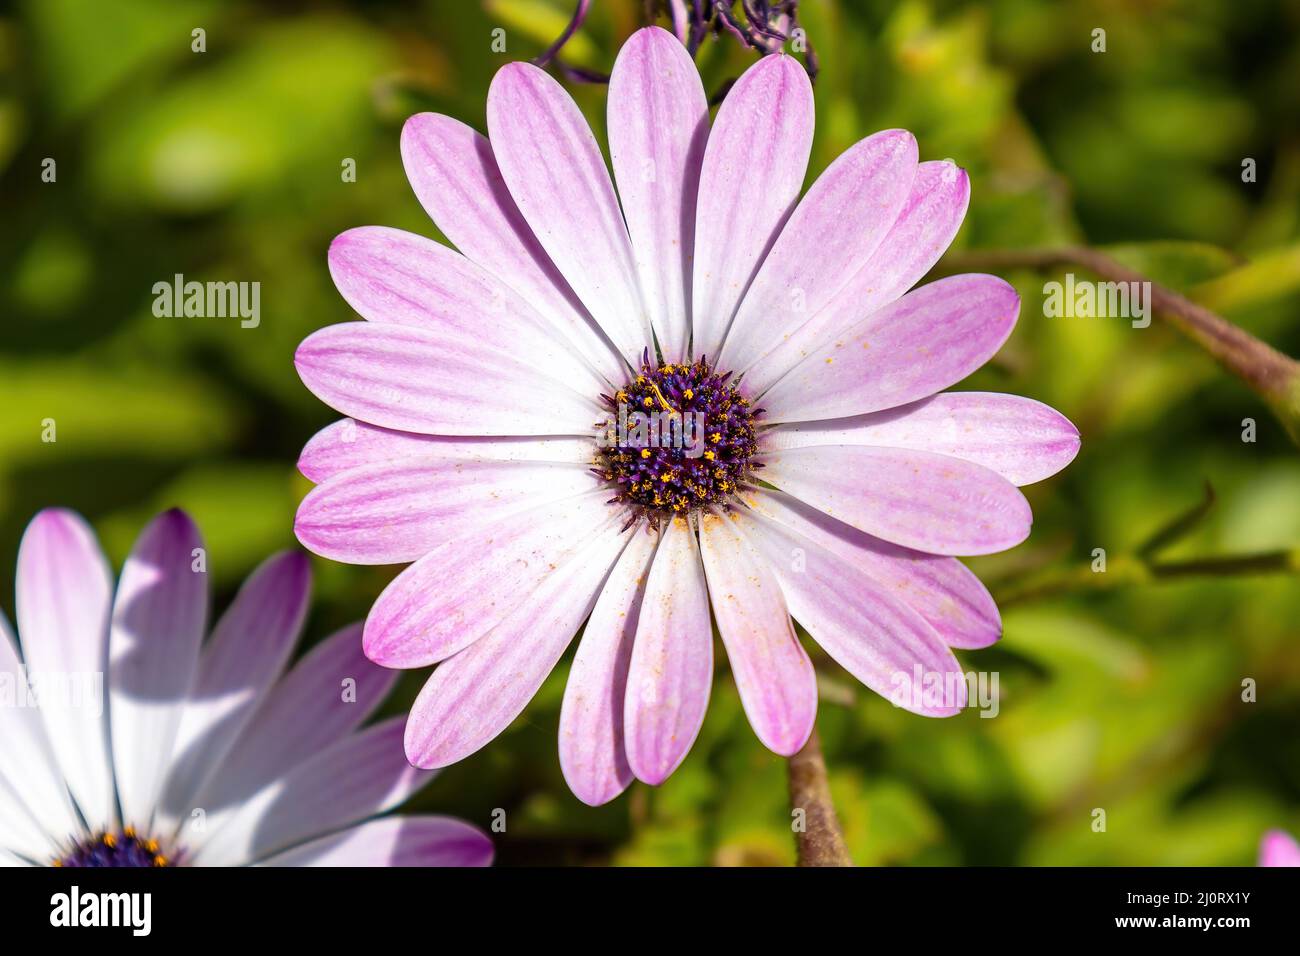 Pink African daisy, Osteospermum is a genus of flowering plants belonging to the Calendulae, one of the smaller tribes of the sunflower, daisy family Stock Photo